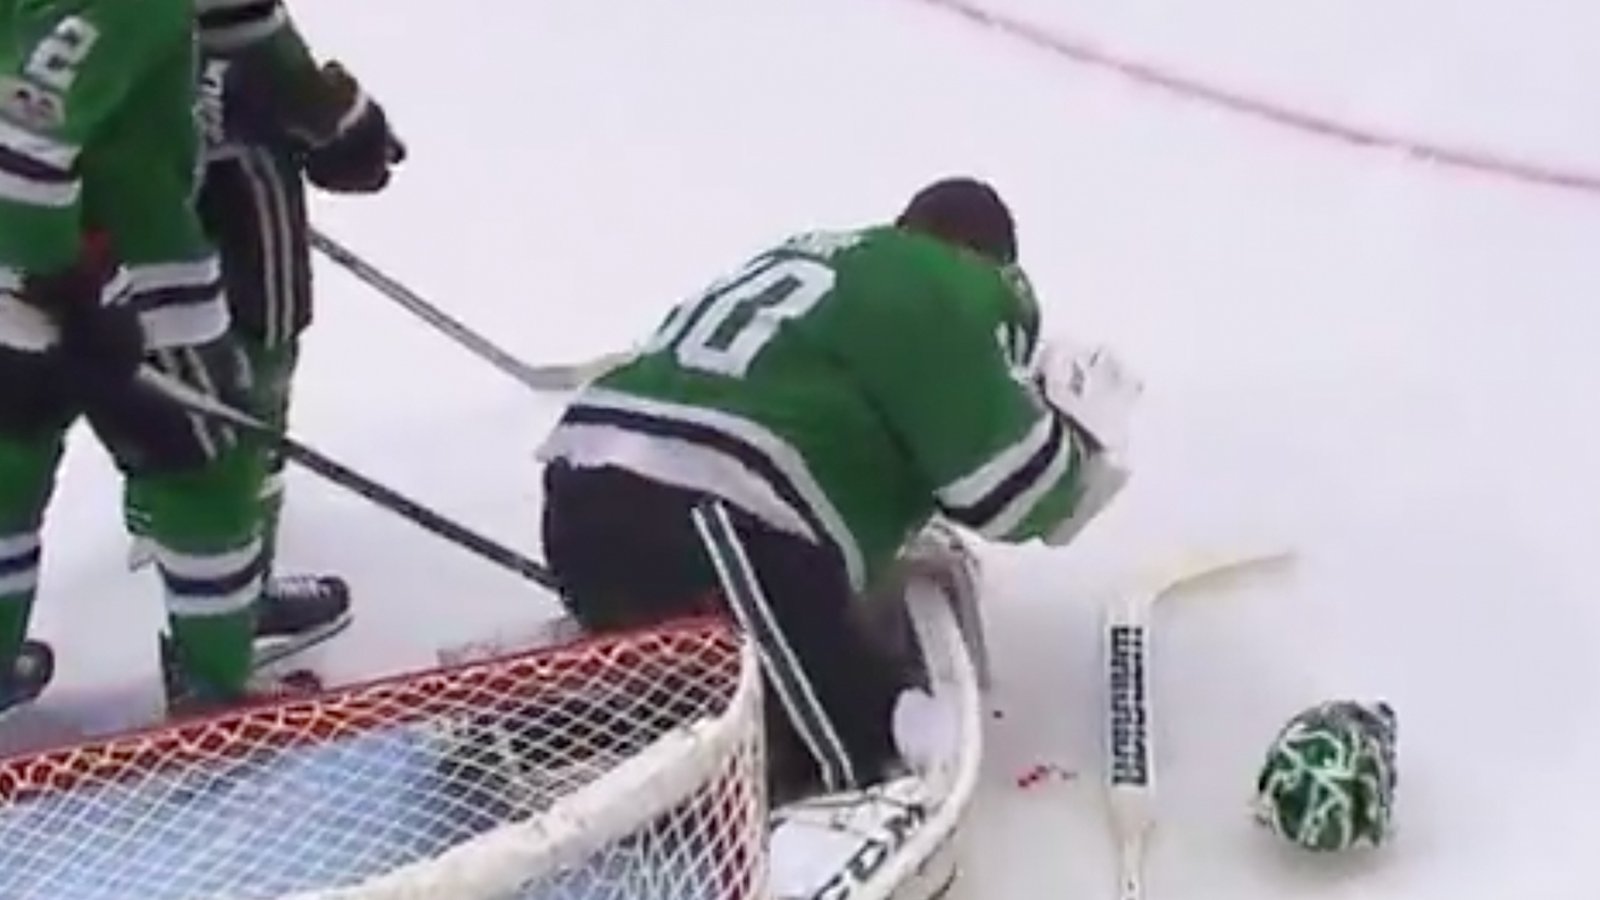 Must See: Stars’ Bishop reveals brutal injury from Friday’s head shot